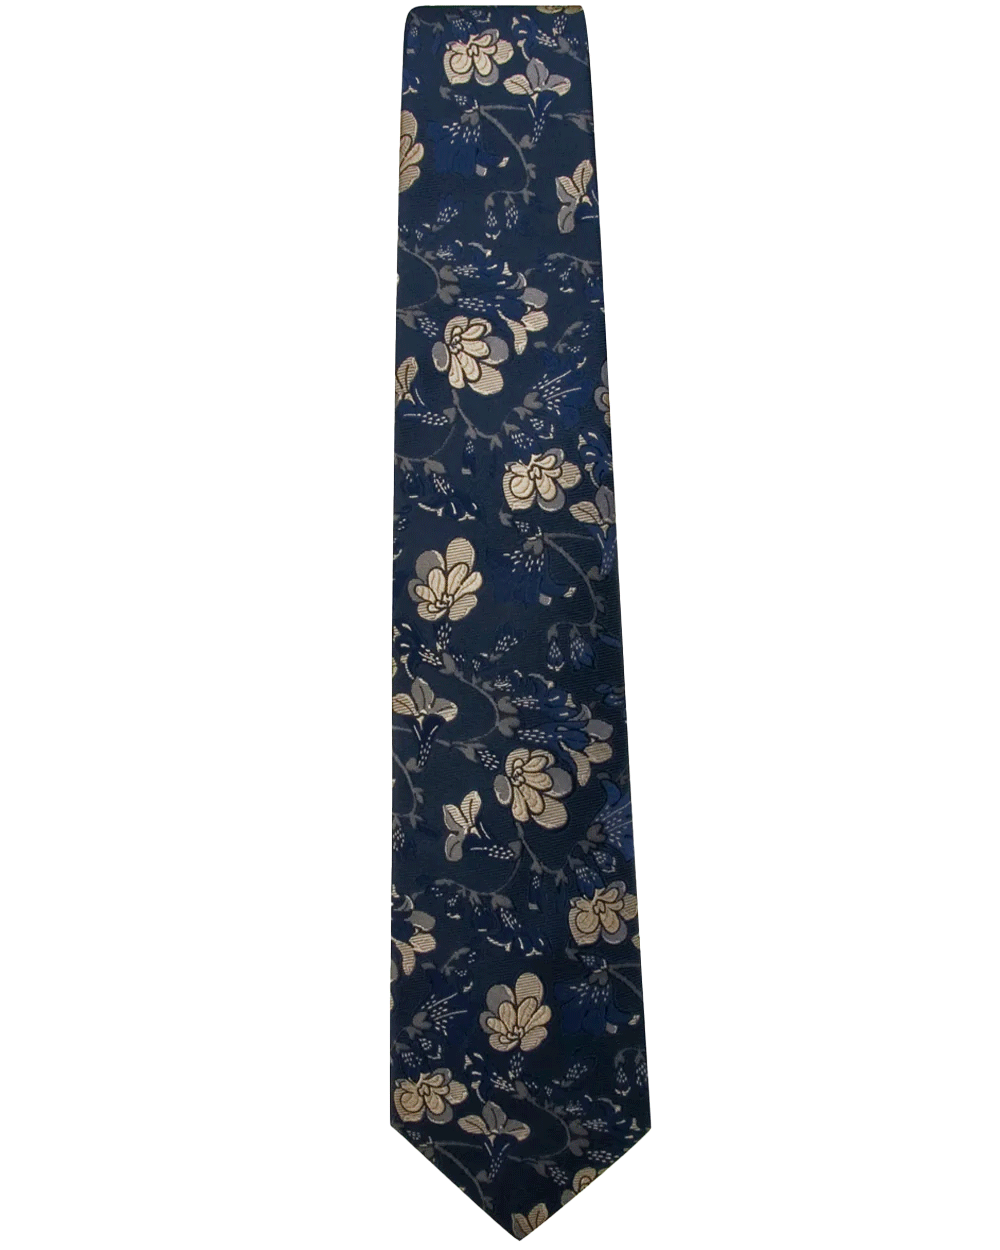 Navy and Butter Yellow Floral Tie